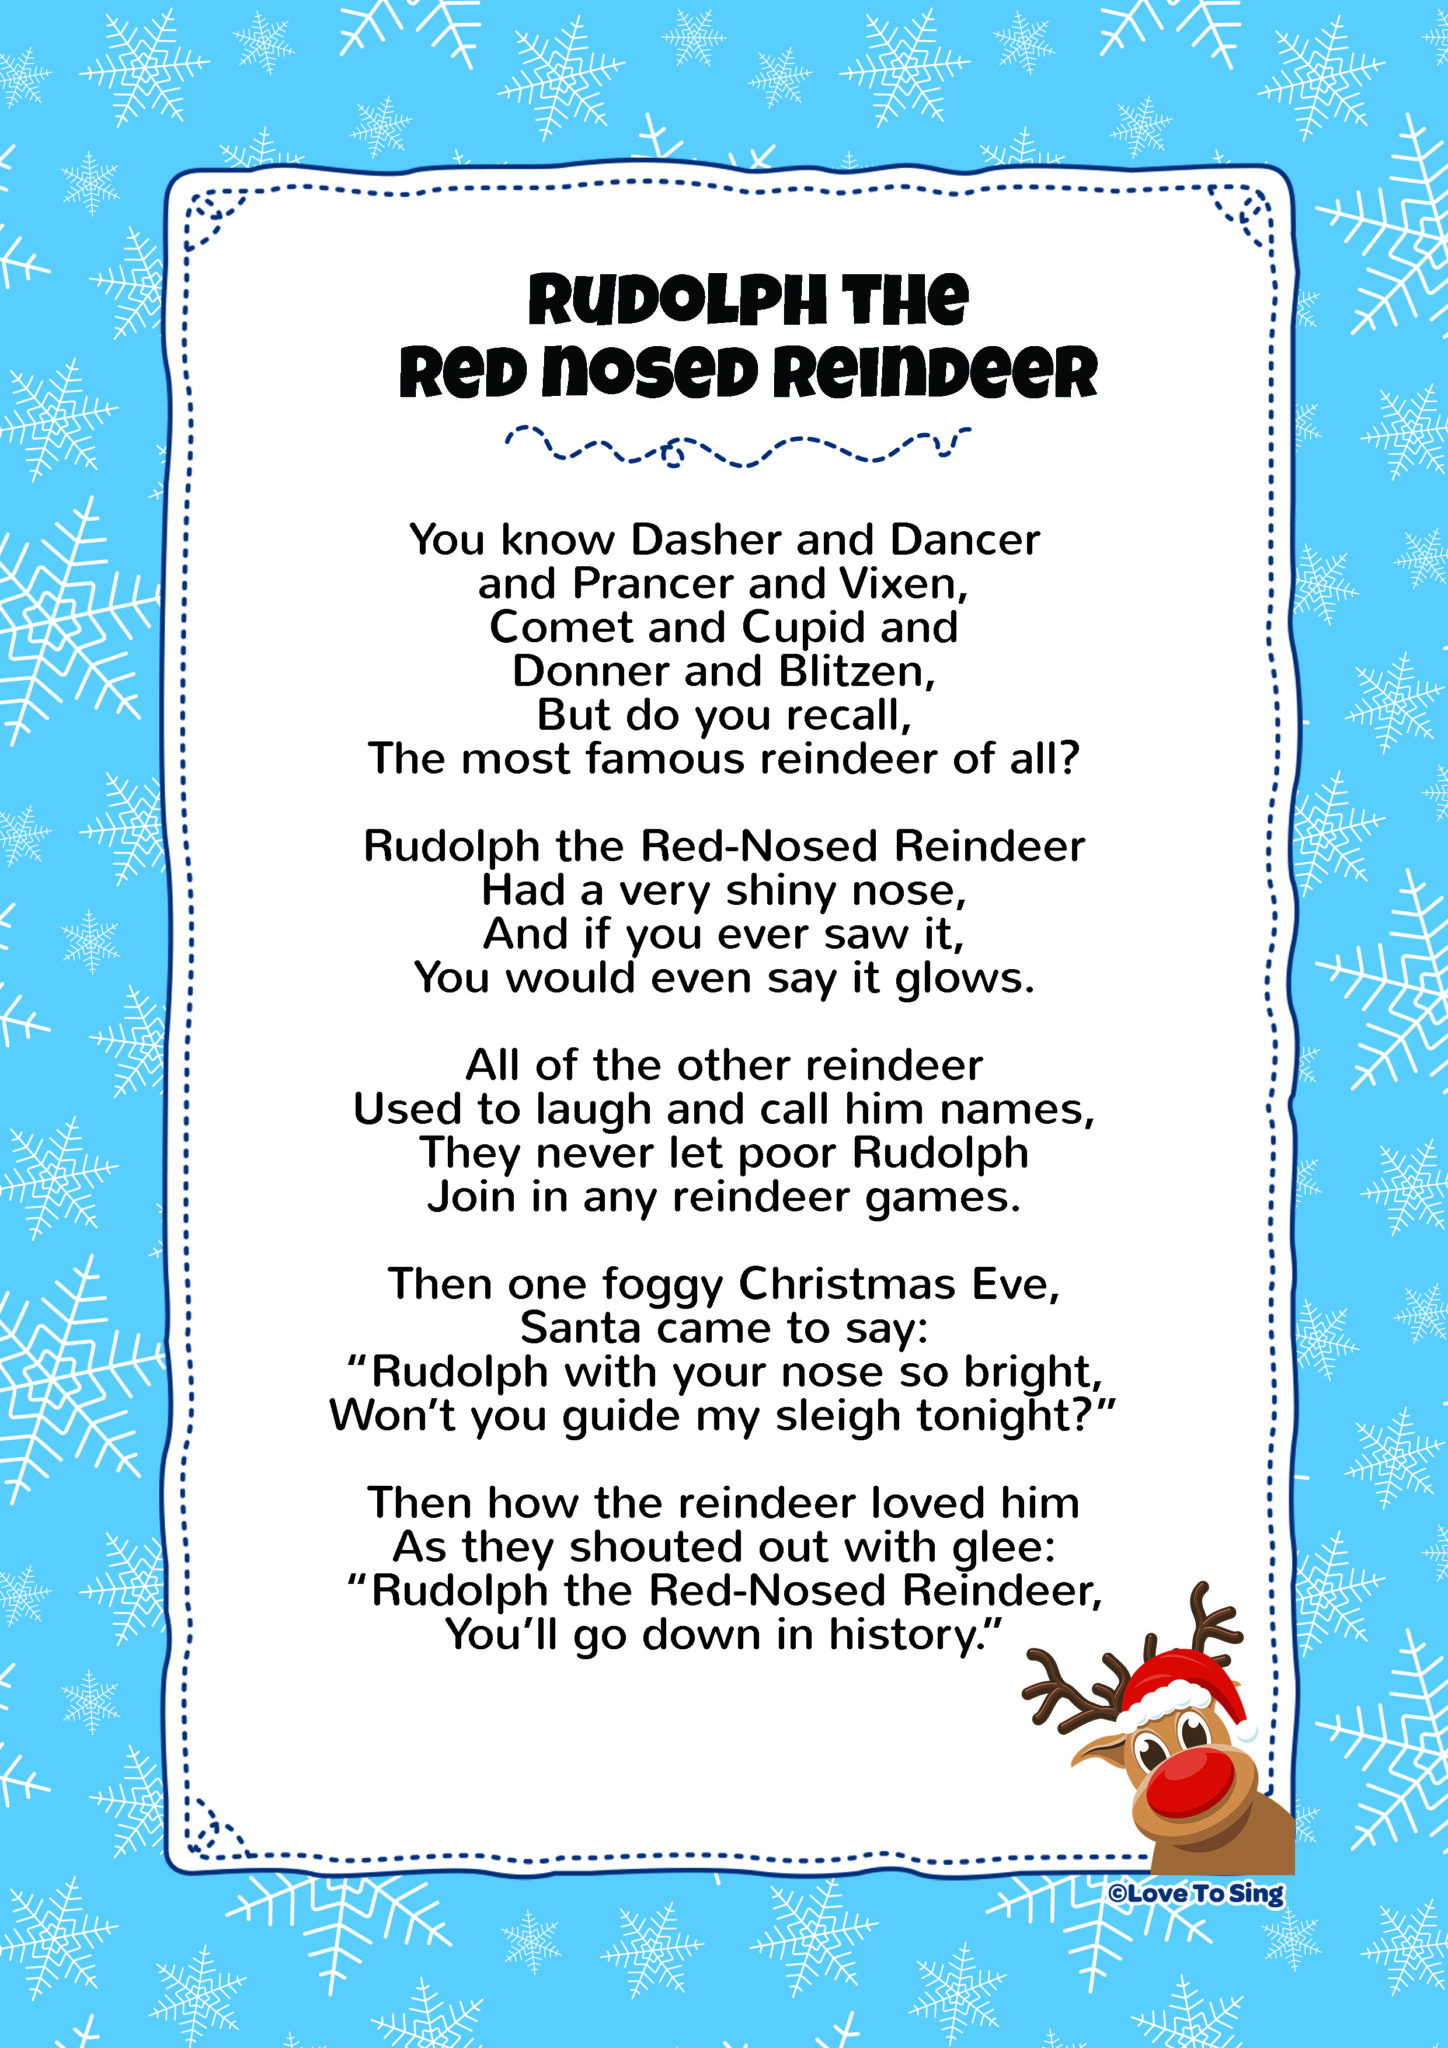 Lyrics for rudolph the red-nosed reindeer printable